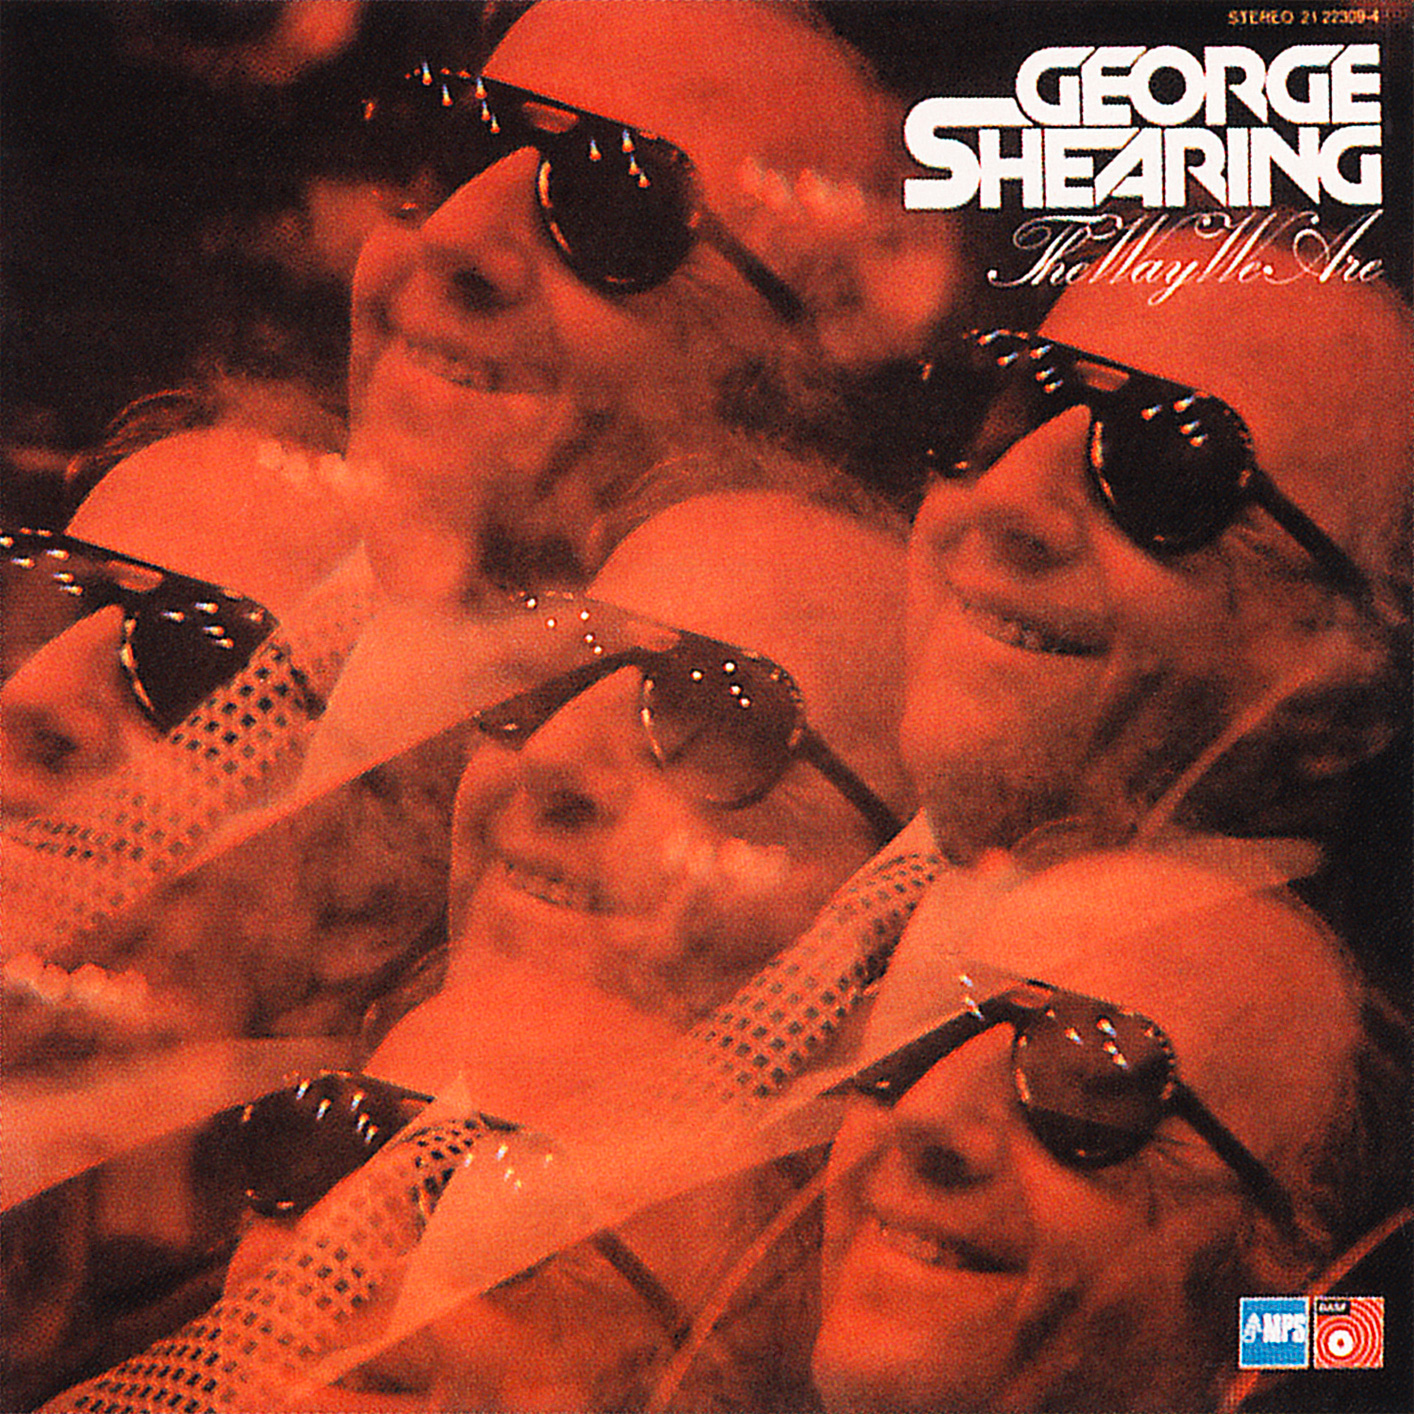 The George Shearing Quintet & Amigos – The Way We Are (1974/2014) [HighResAudio FLAC 24bit/88,2kHz]